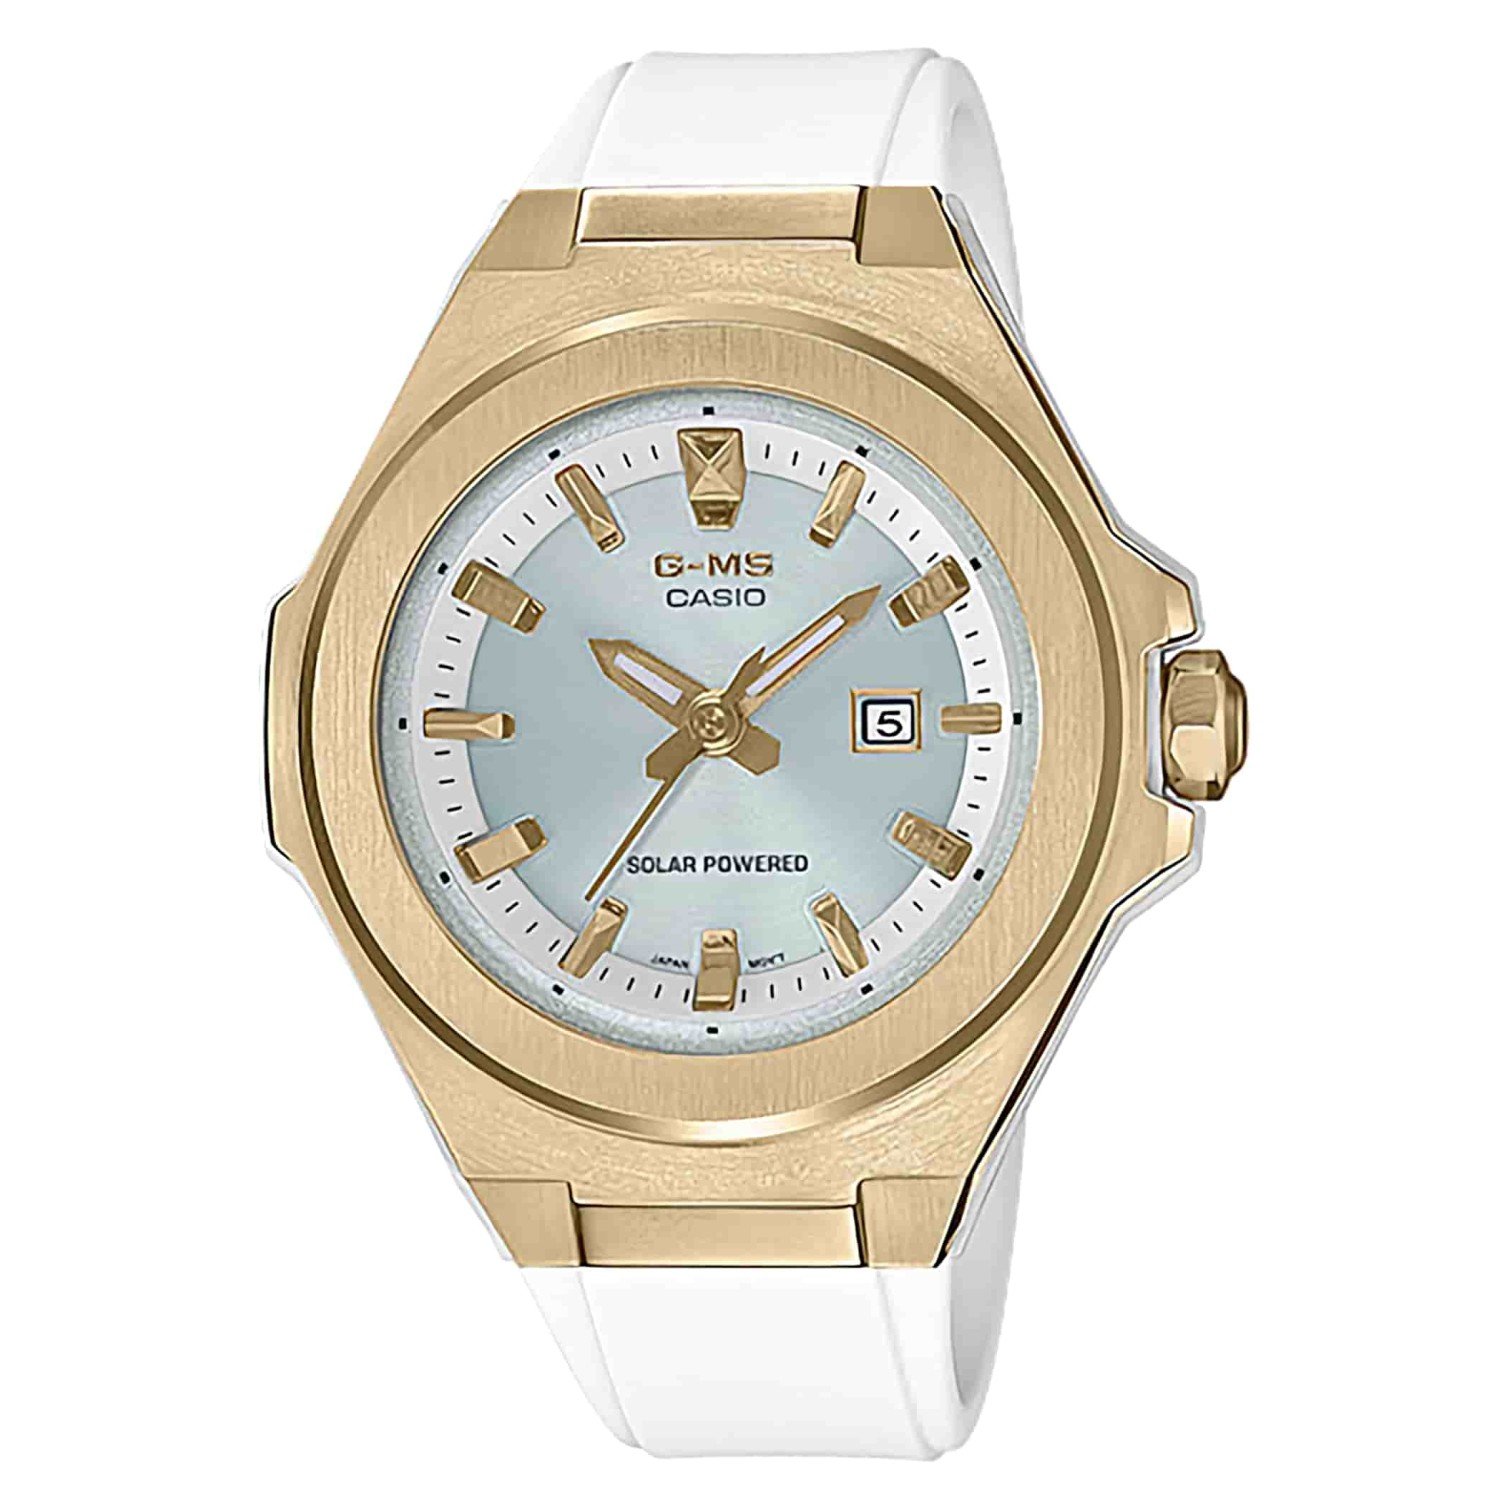 MSGS500G-7A Casio BabY-G  G-MS Watches. BABY-G G-MS, the lineup of watches for the active and sophisticated woman of today, announces cool new models with simple and highly elegant designs.The flat and sharp bezel, the pyramid cut of the hour markers, the